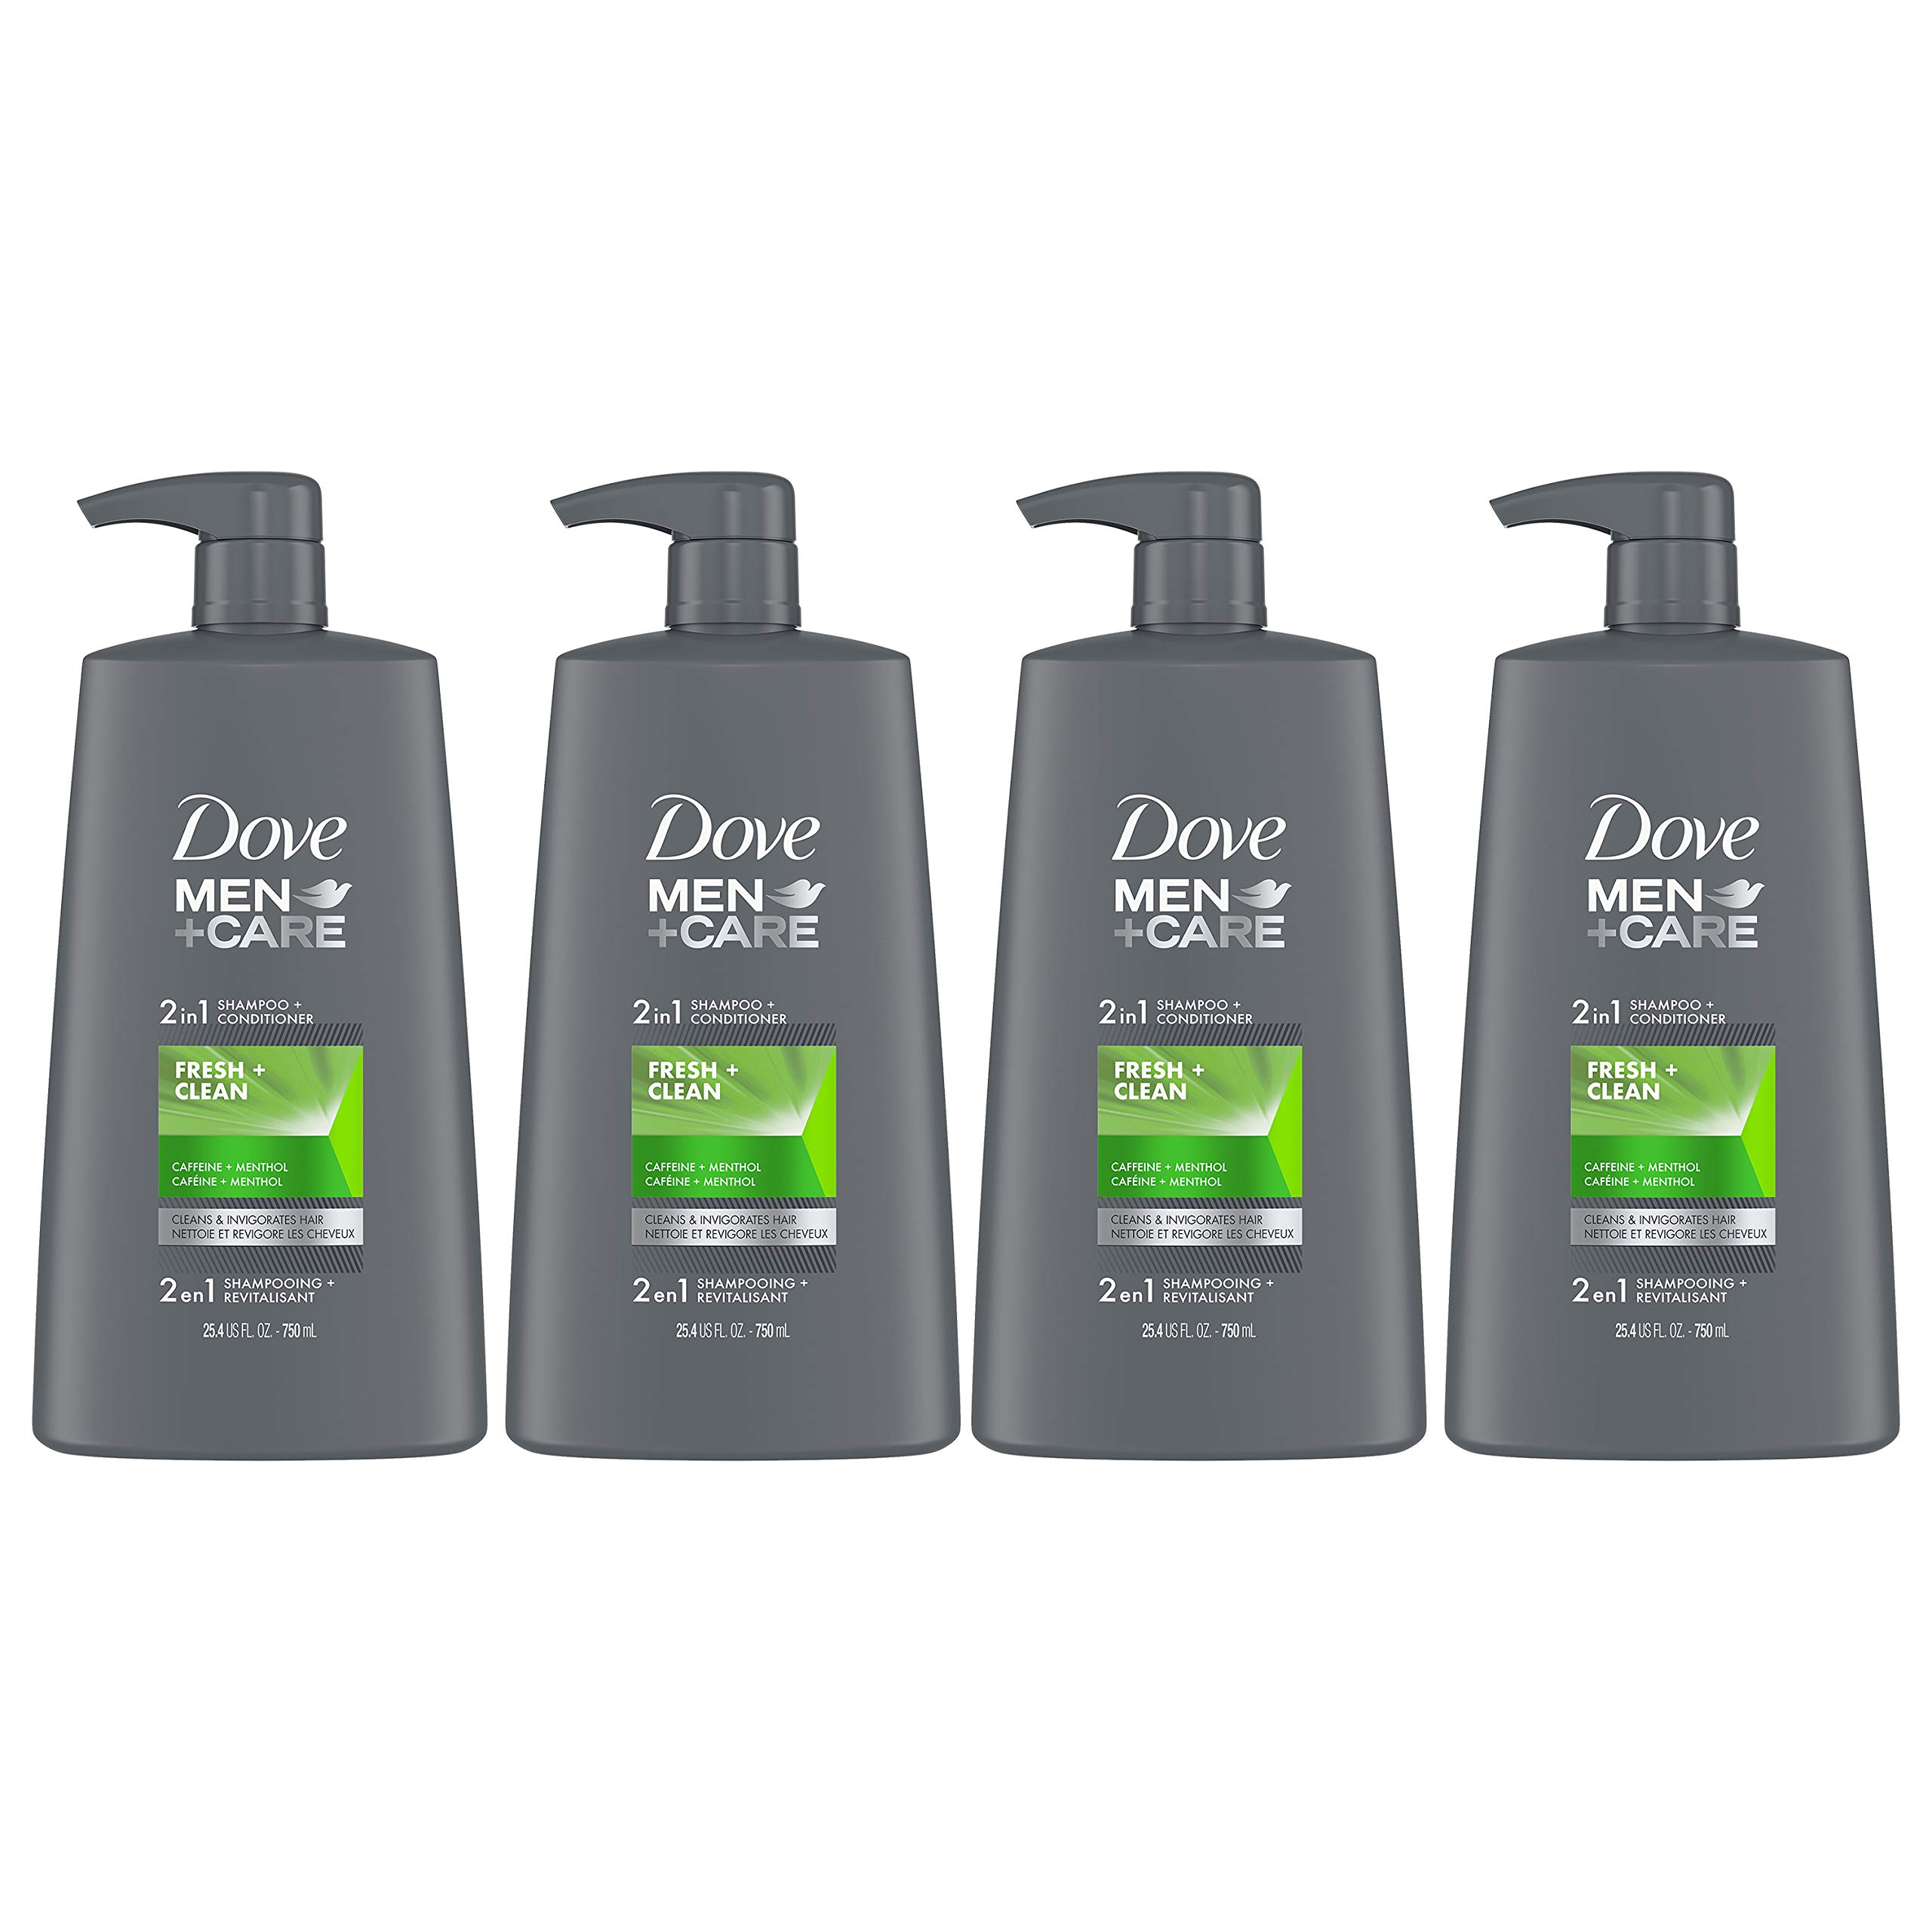 Dove Men+Care 2-in-1 Shampoo and Conditioner Nourishes and Invigorates  Fresh and Clean Helps Strengthen Hair  oz, Pack of 4